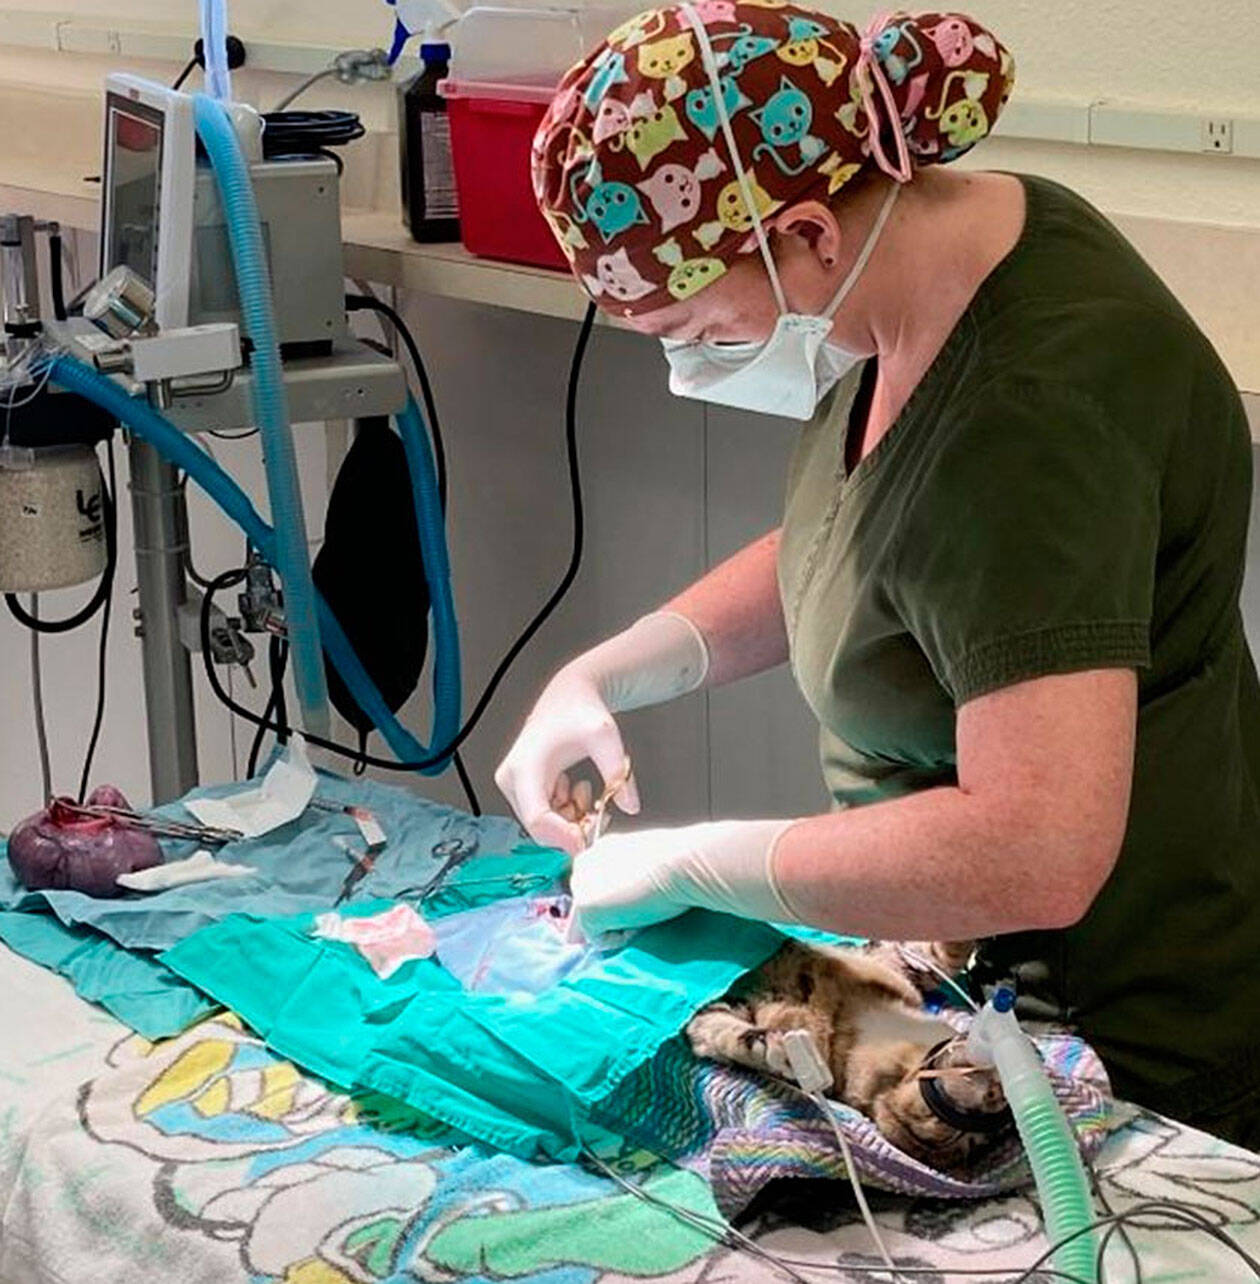 KHS courtesy photo
Dr. Jen Stonequist operates on a cat in the shelter’s new Lifesaving Center.